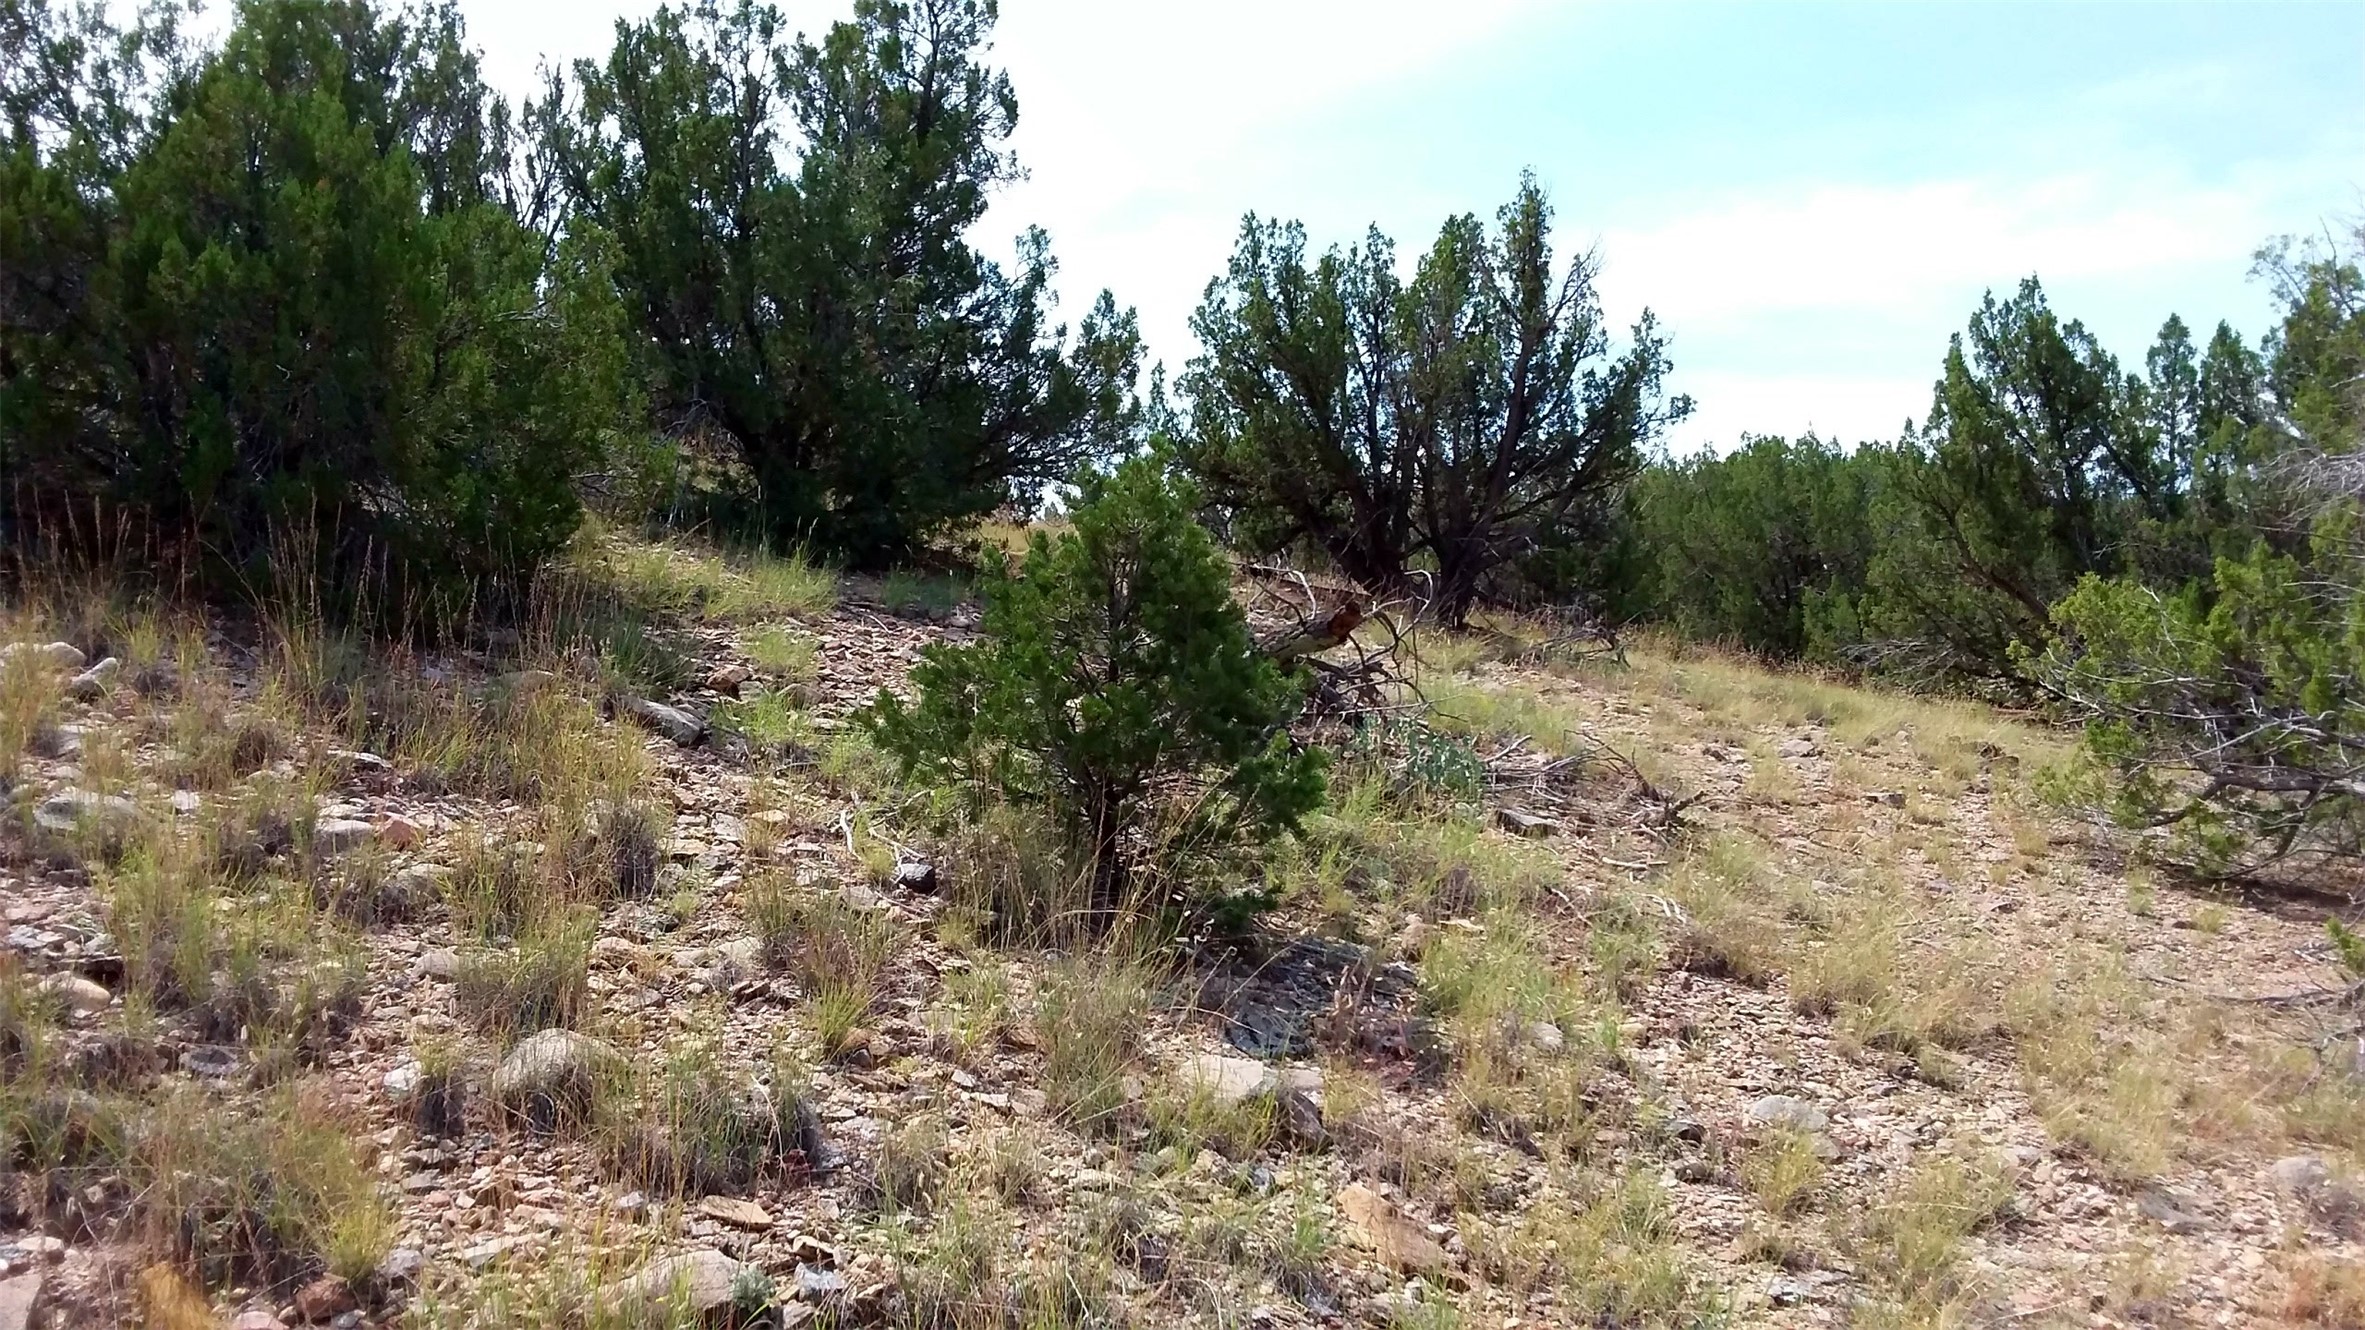 Young pinon trees scattered throughout